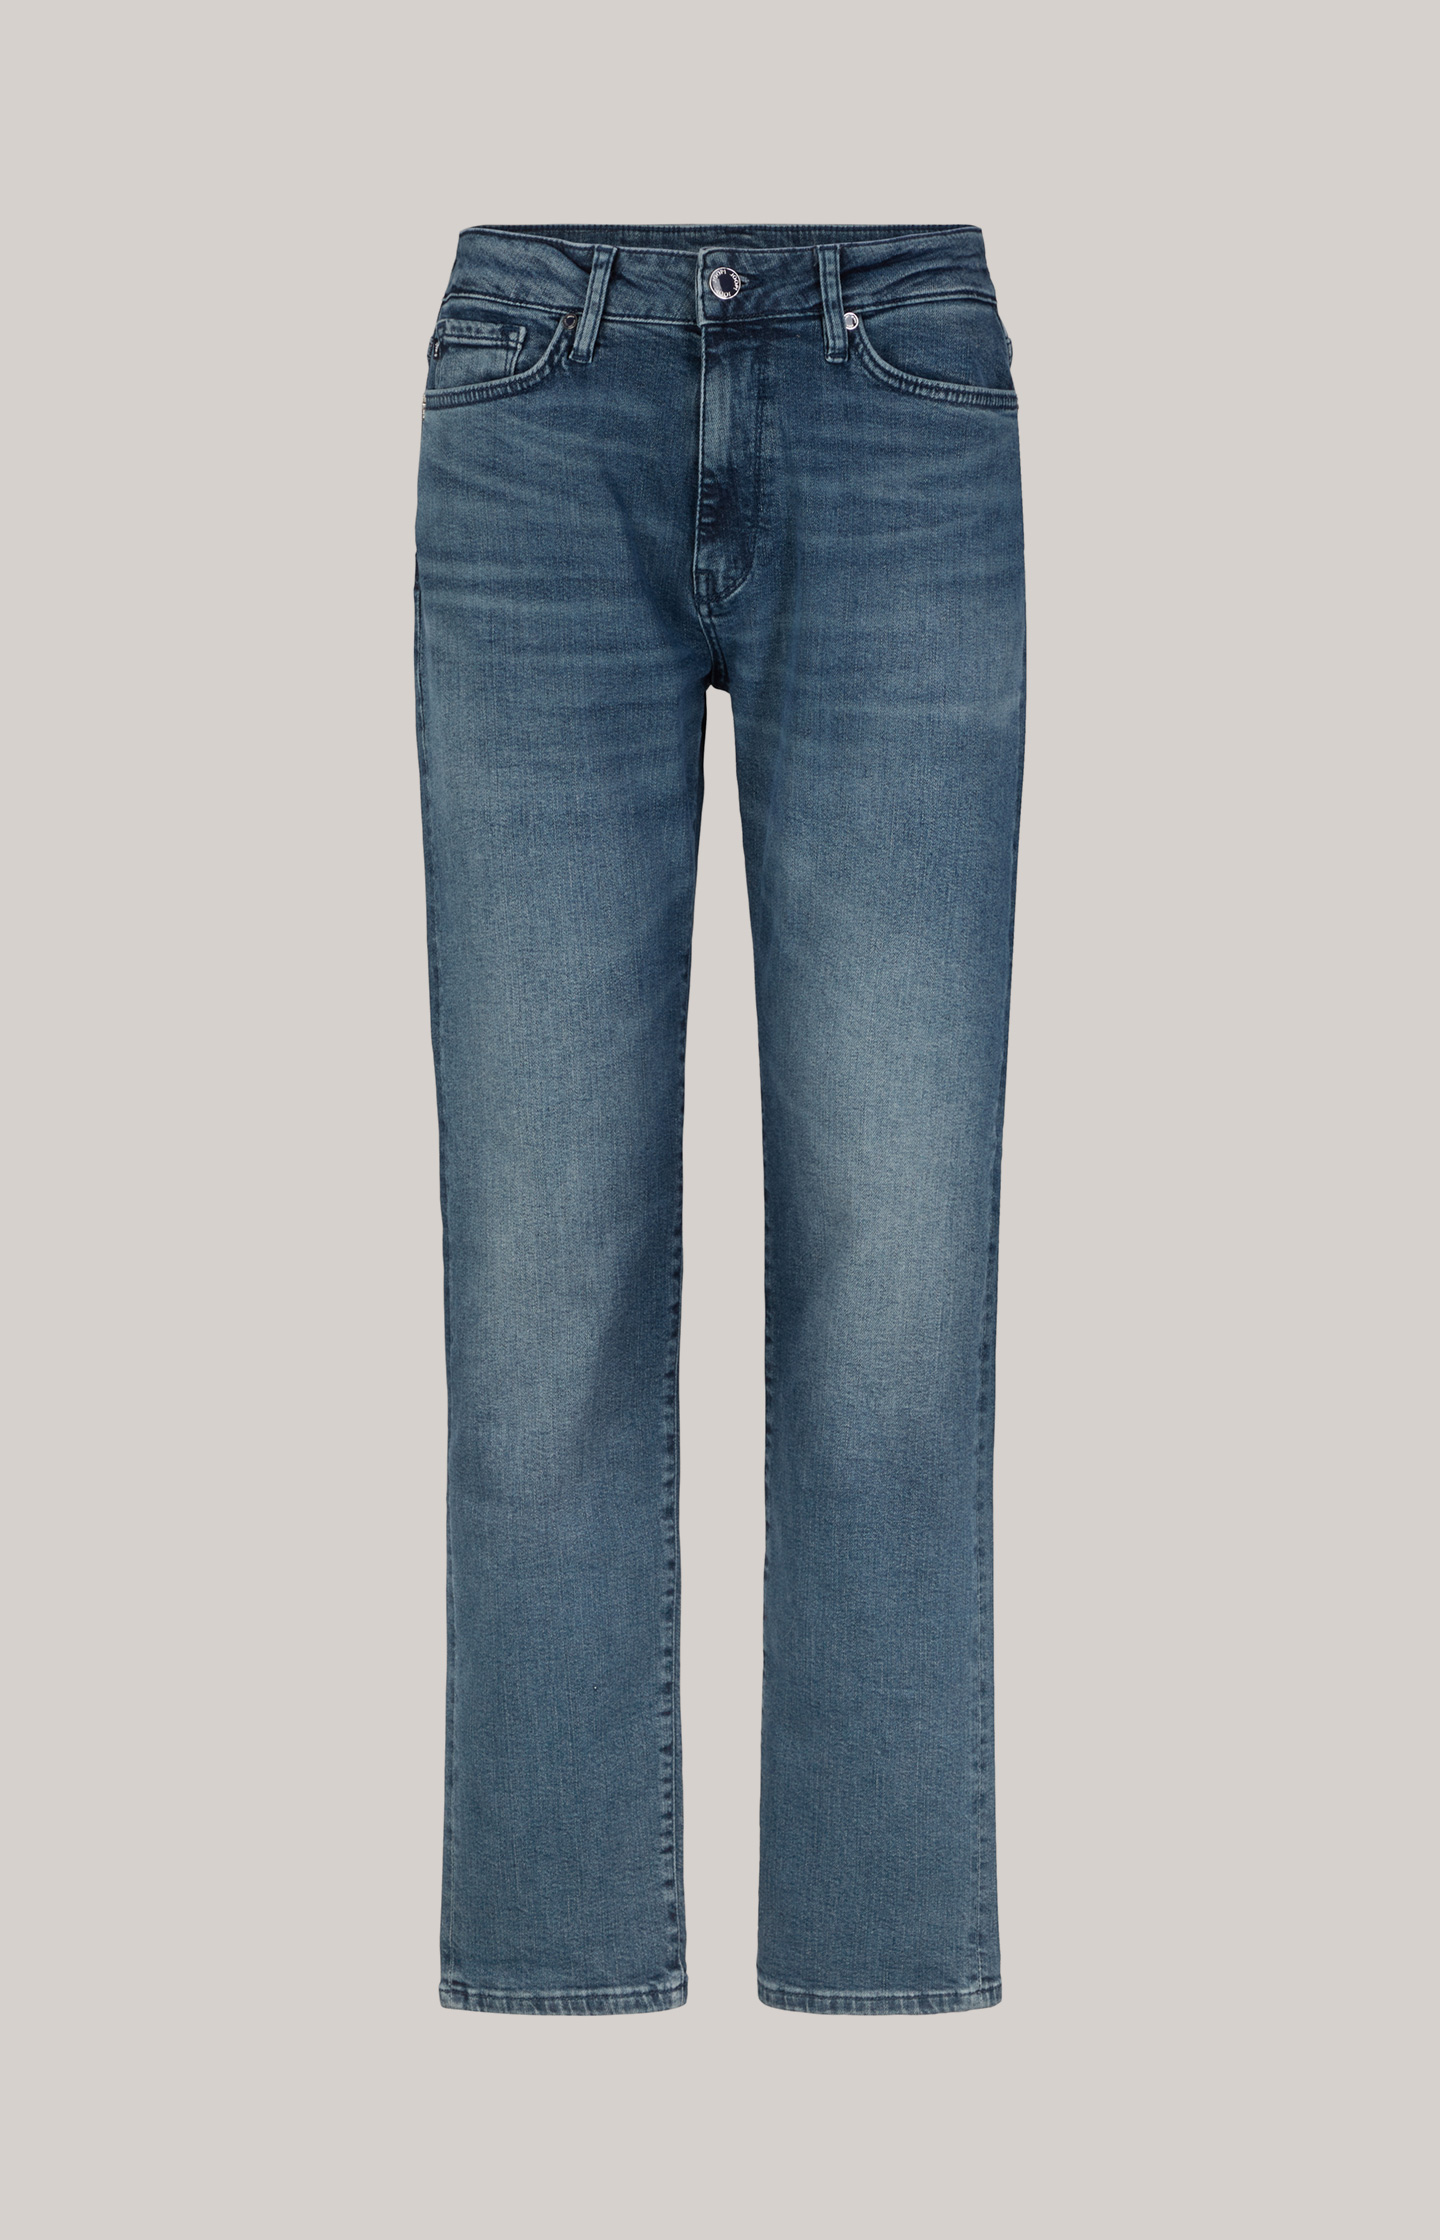 Jeans in a Denim Blue Washed Look - in the JOOP! Online Shop